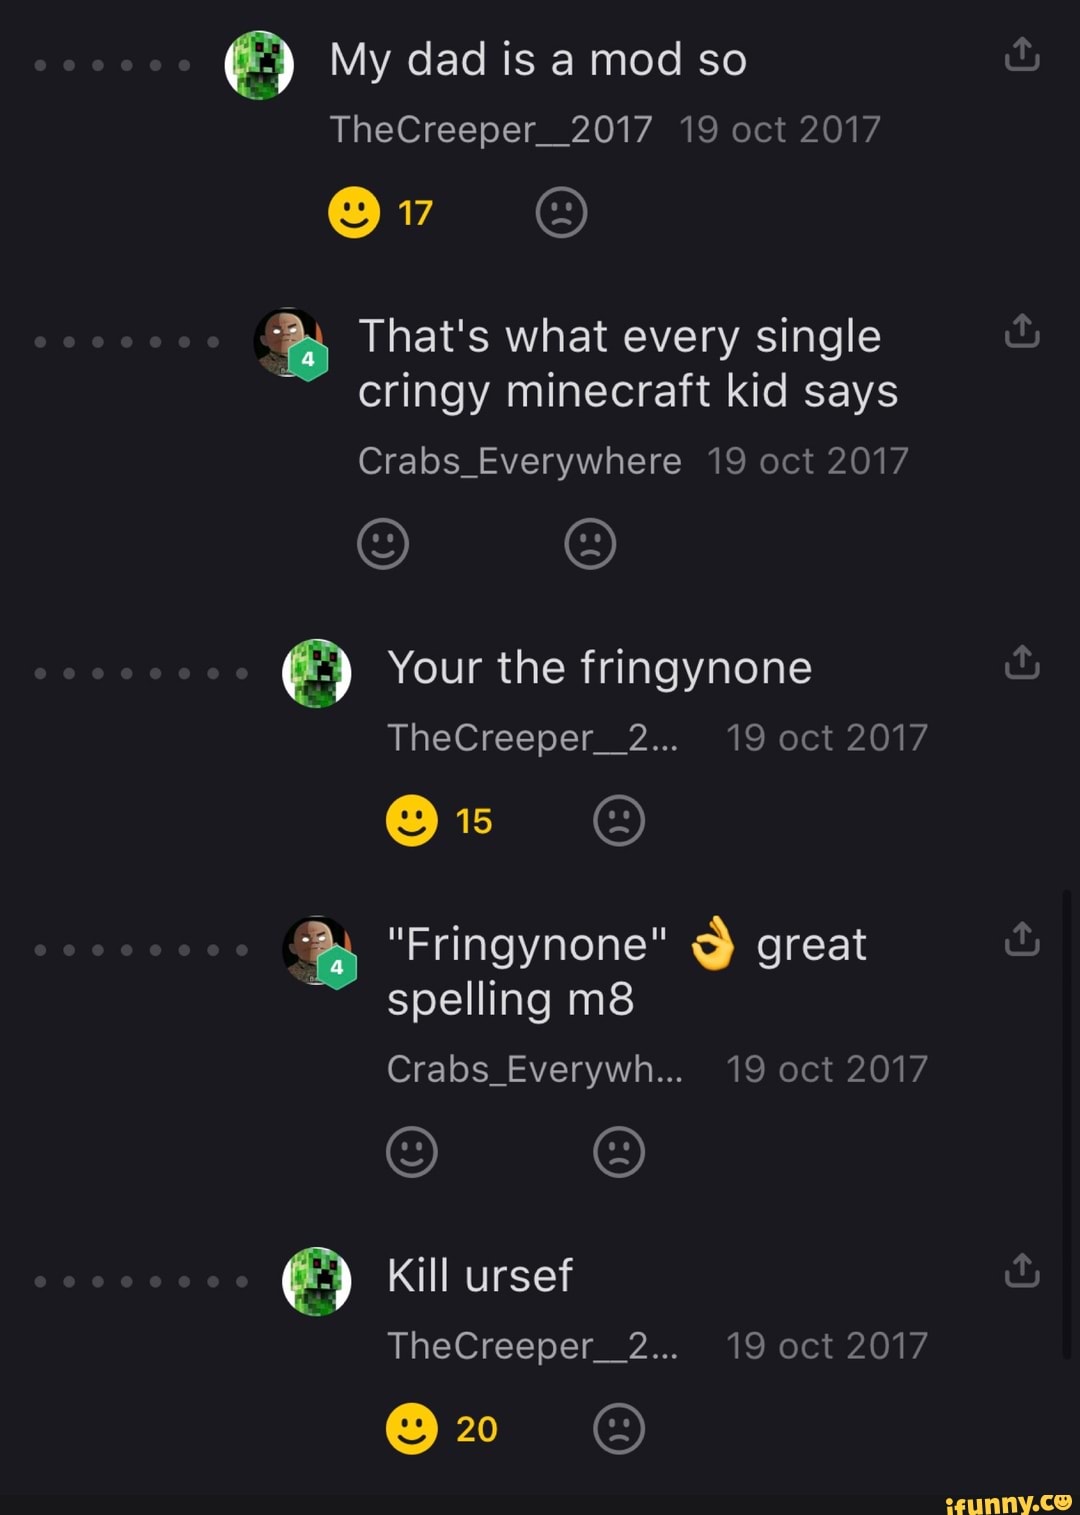 My That S What Every Single Cringy Minecraft Kid Says Crabs Everywhere 19 Oct 17 C C Your The Fringynone Spelling M8 Crabs Everywh 19 Oct 17 Ifunny